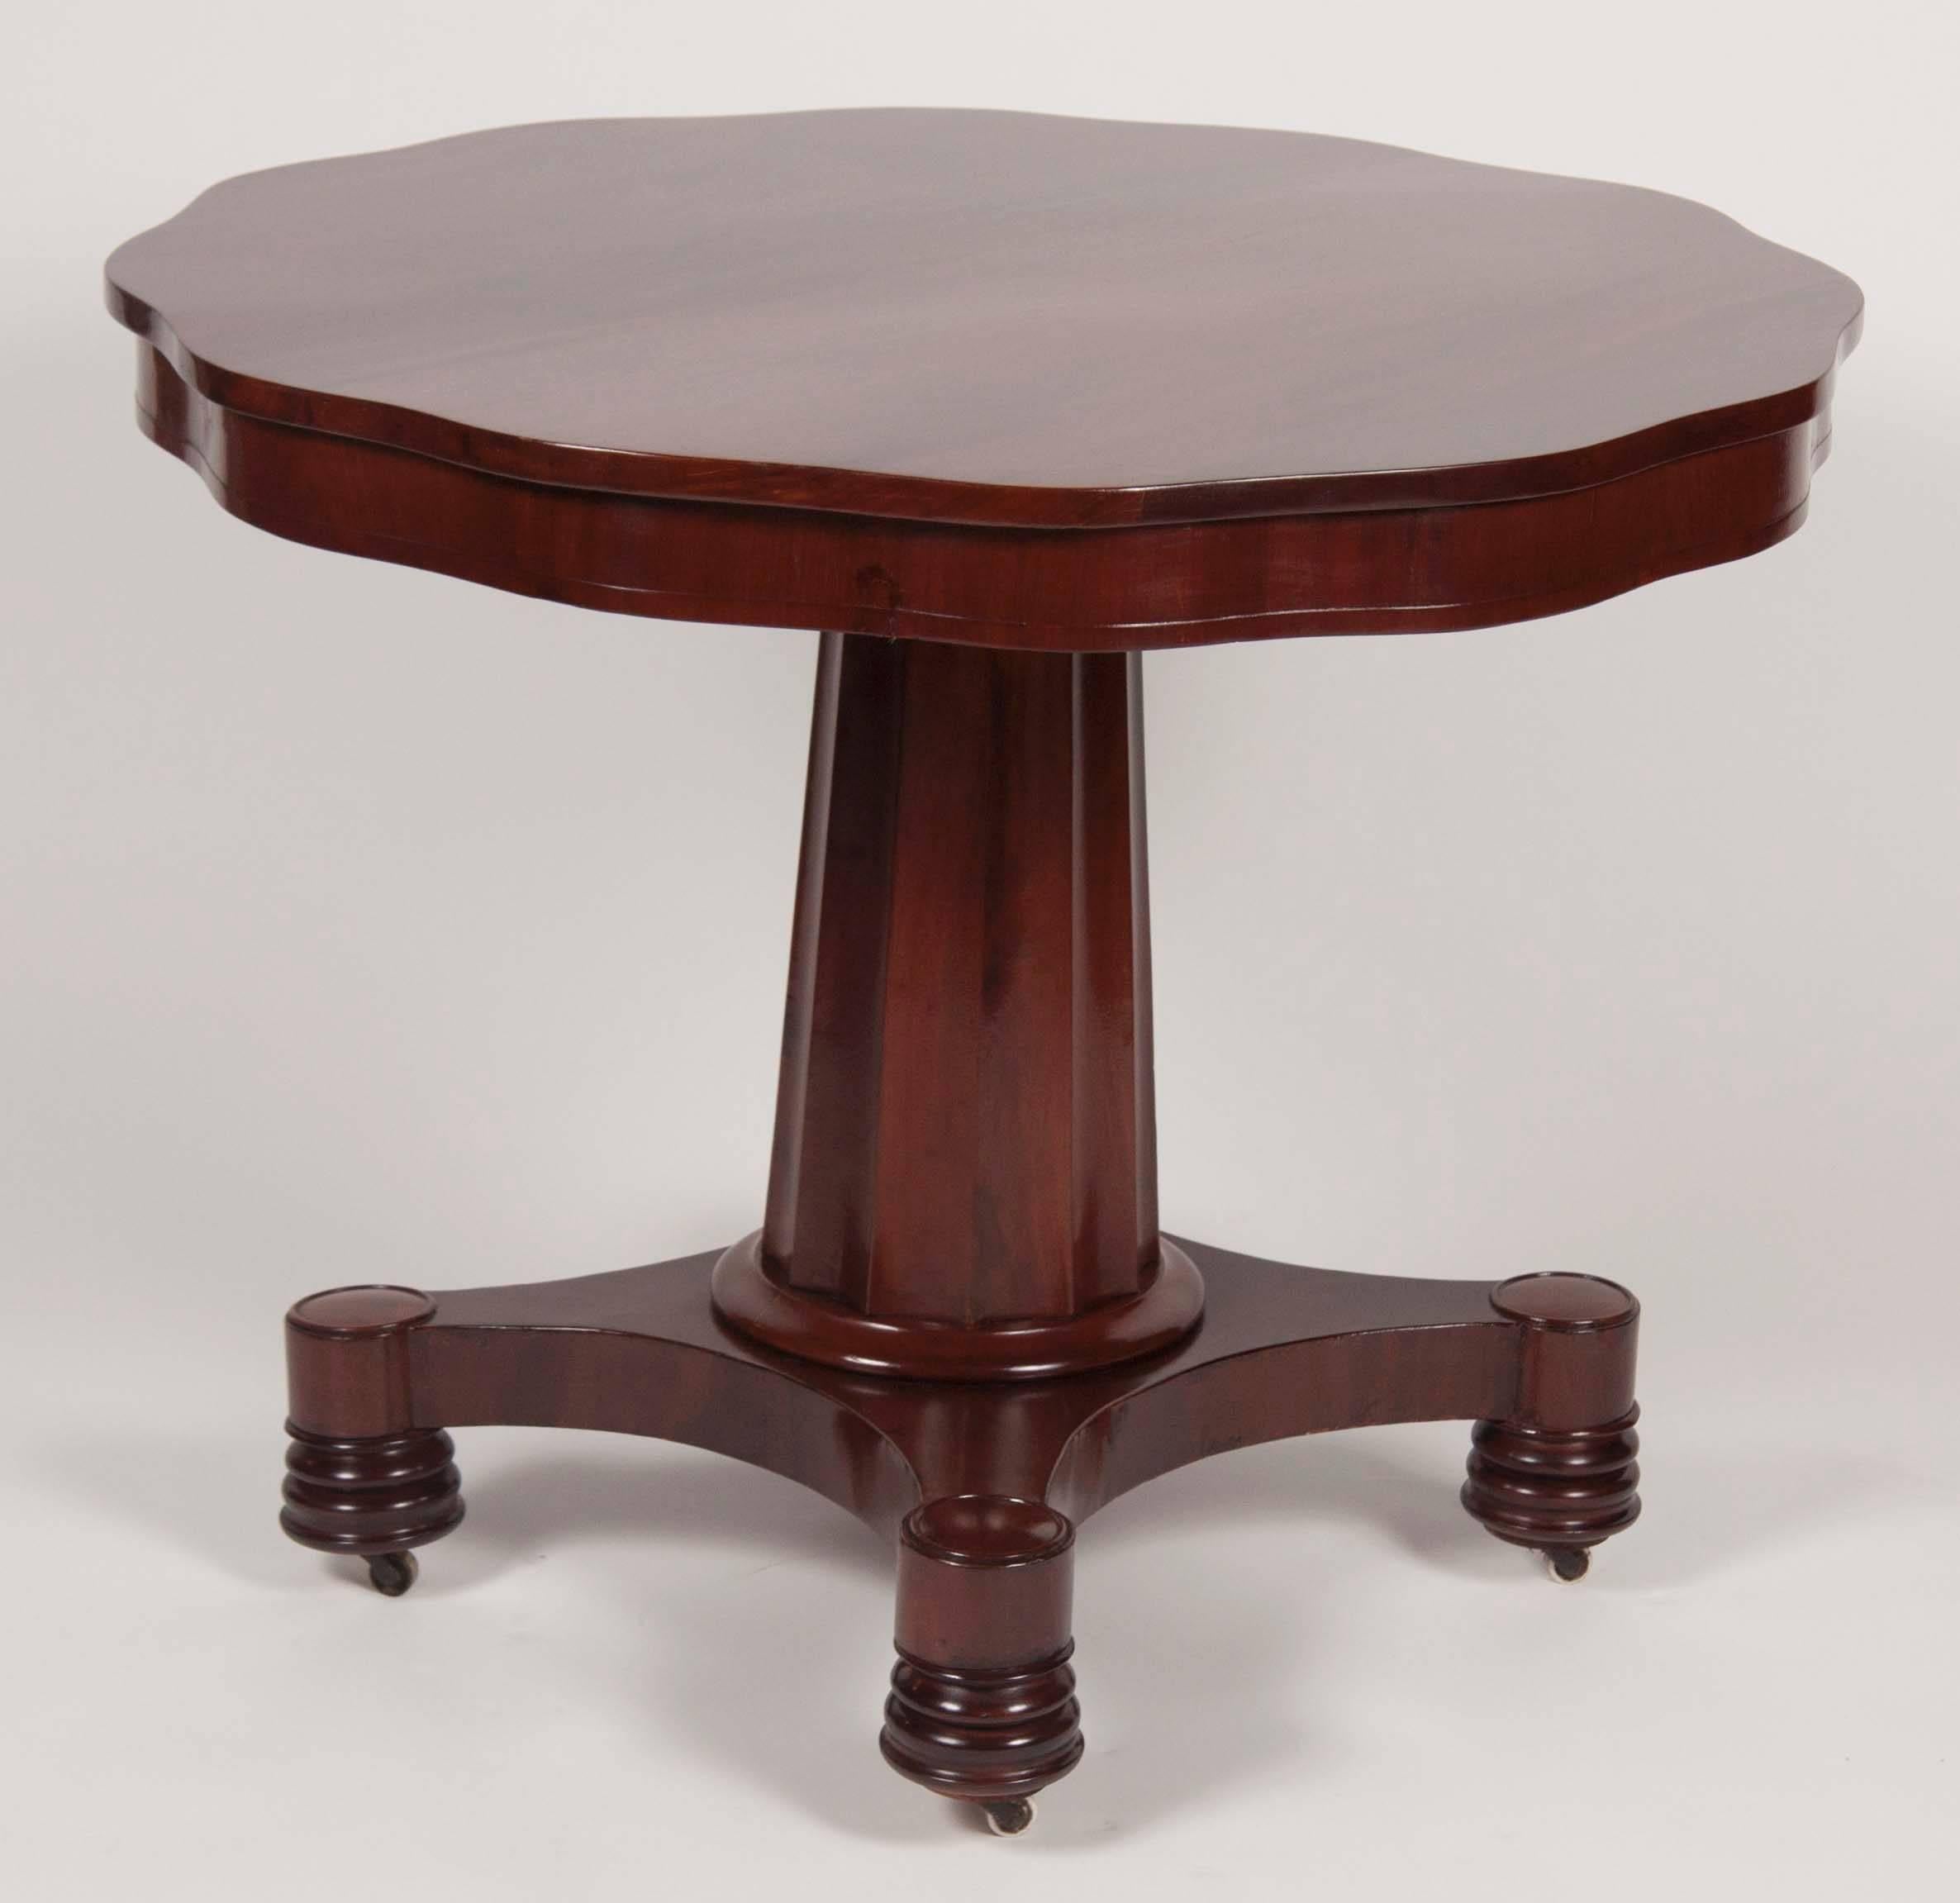 An American mahogany and mahogany veneer Empire table with interesting leave form and fluted base.